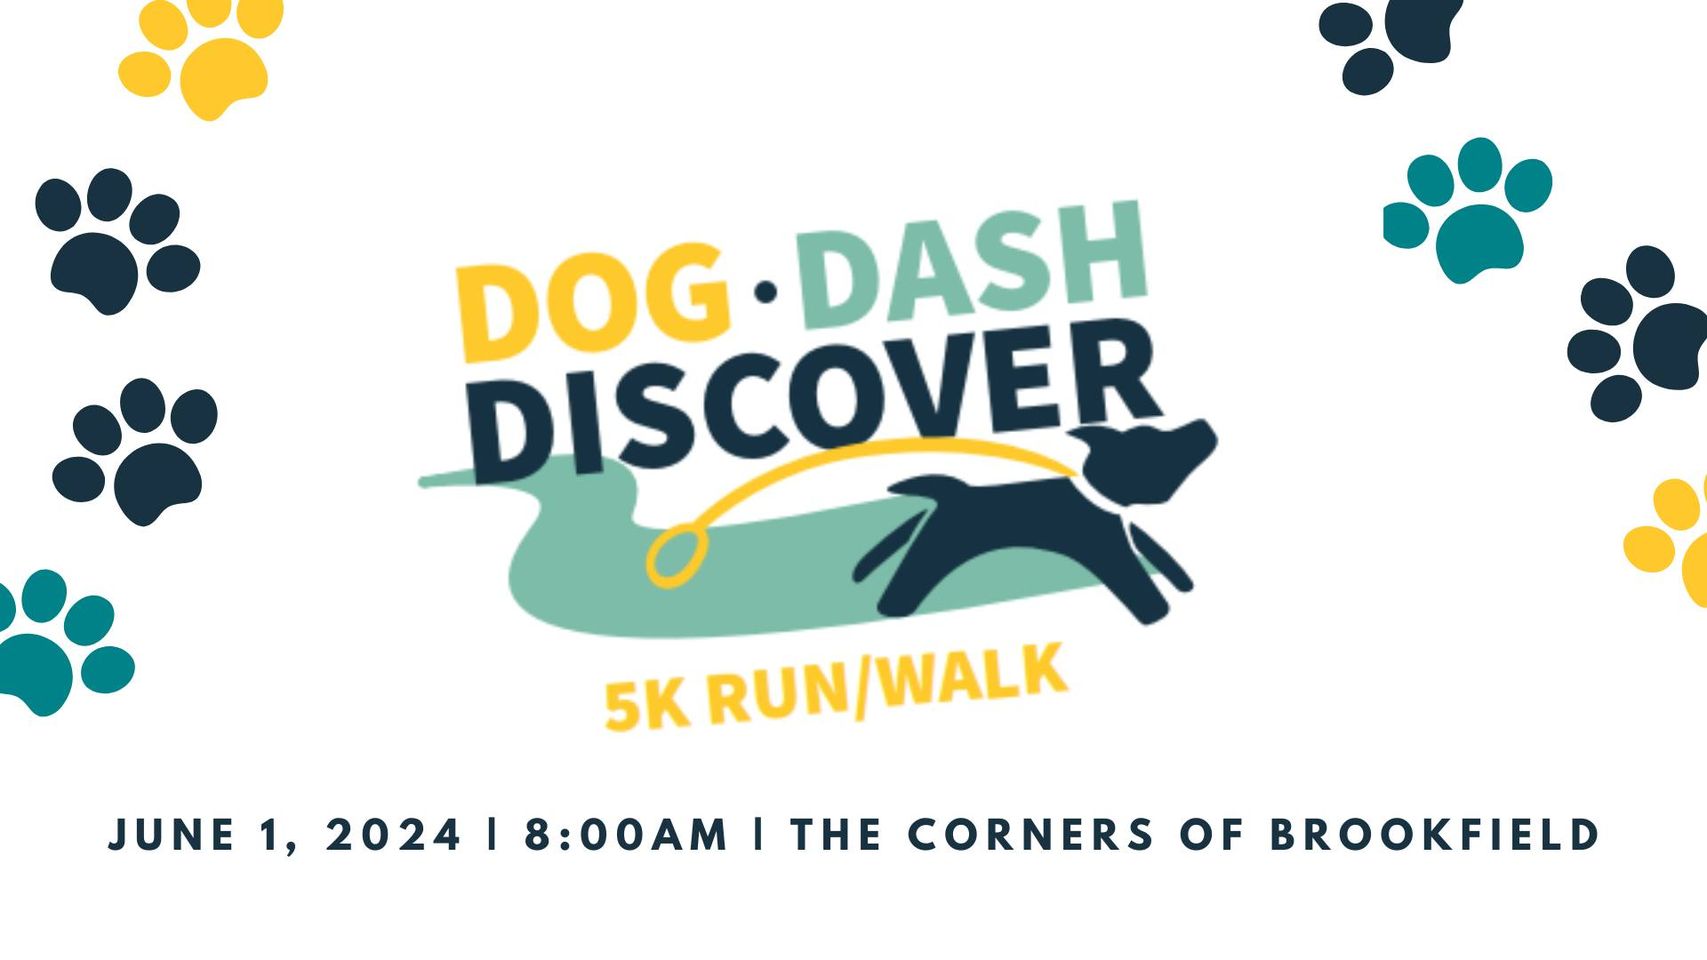 Article: Dog, Dash, Discover 5K